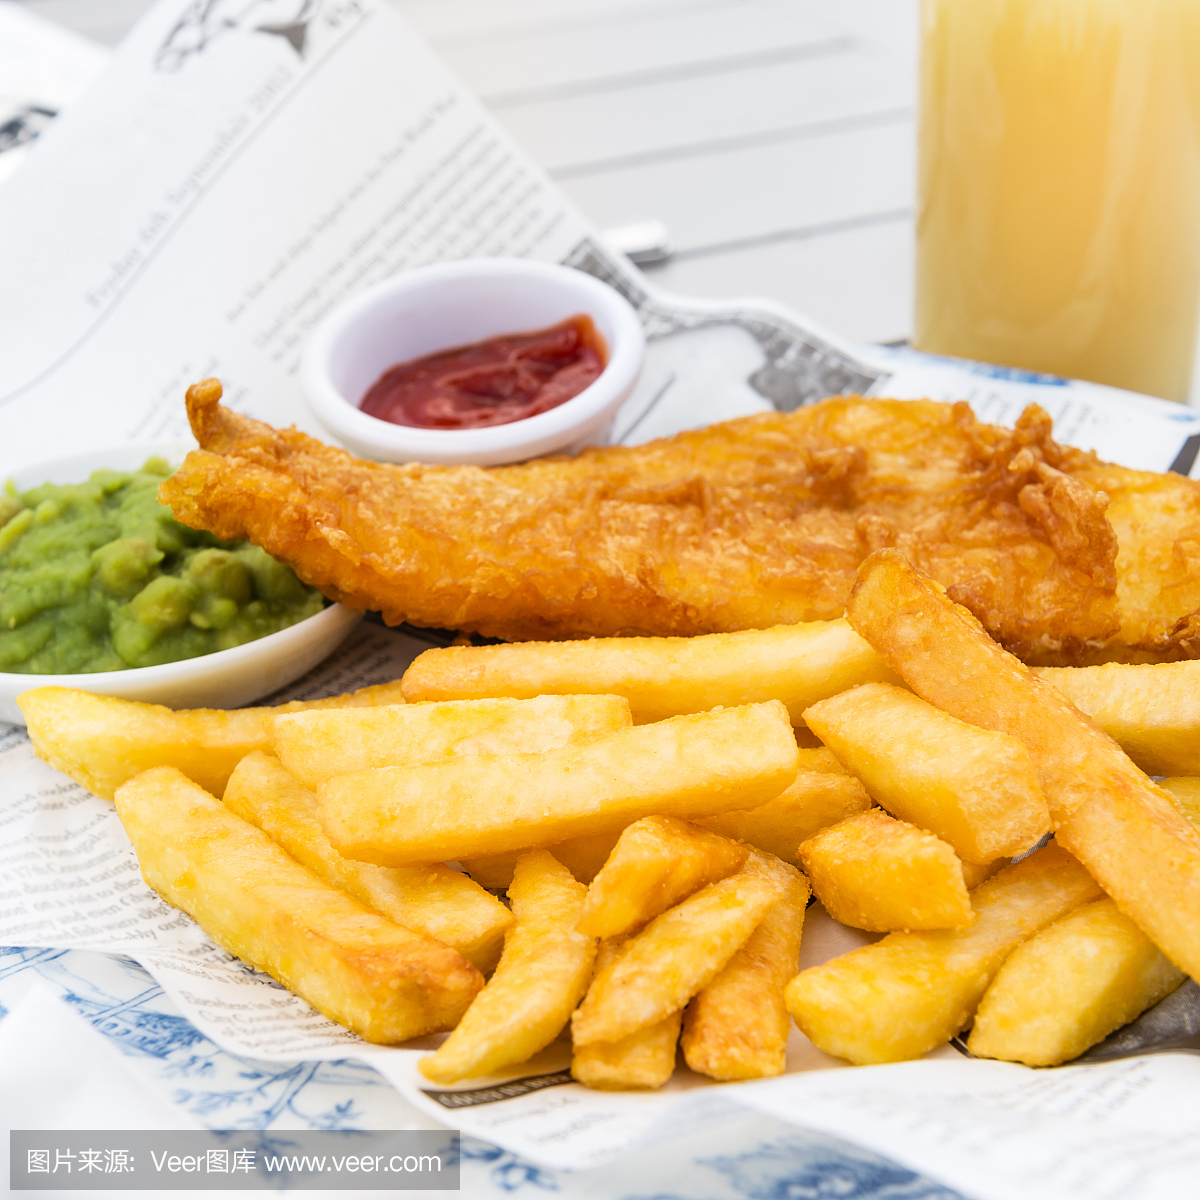 Traditional English Food such as Fish and Chip